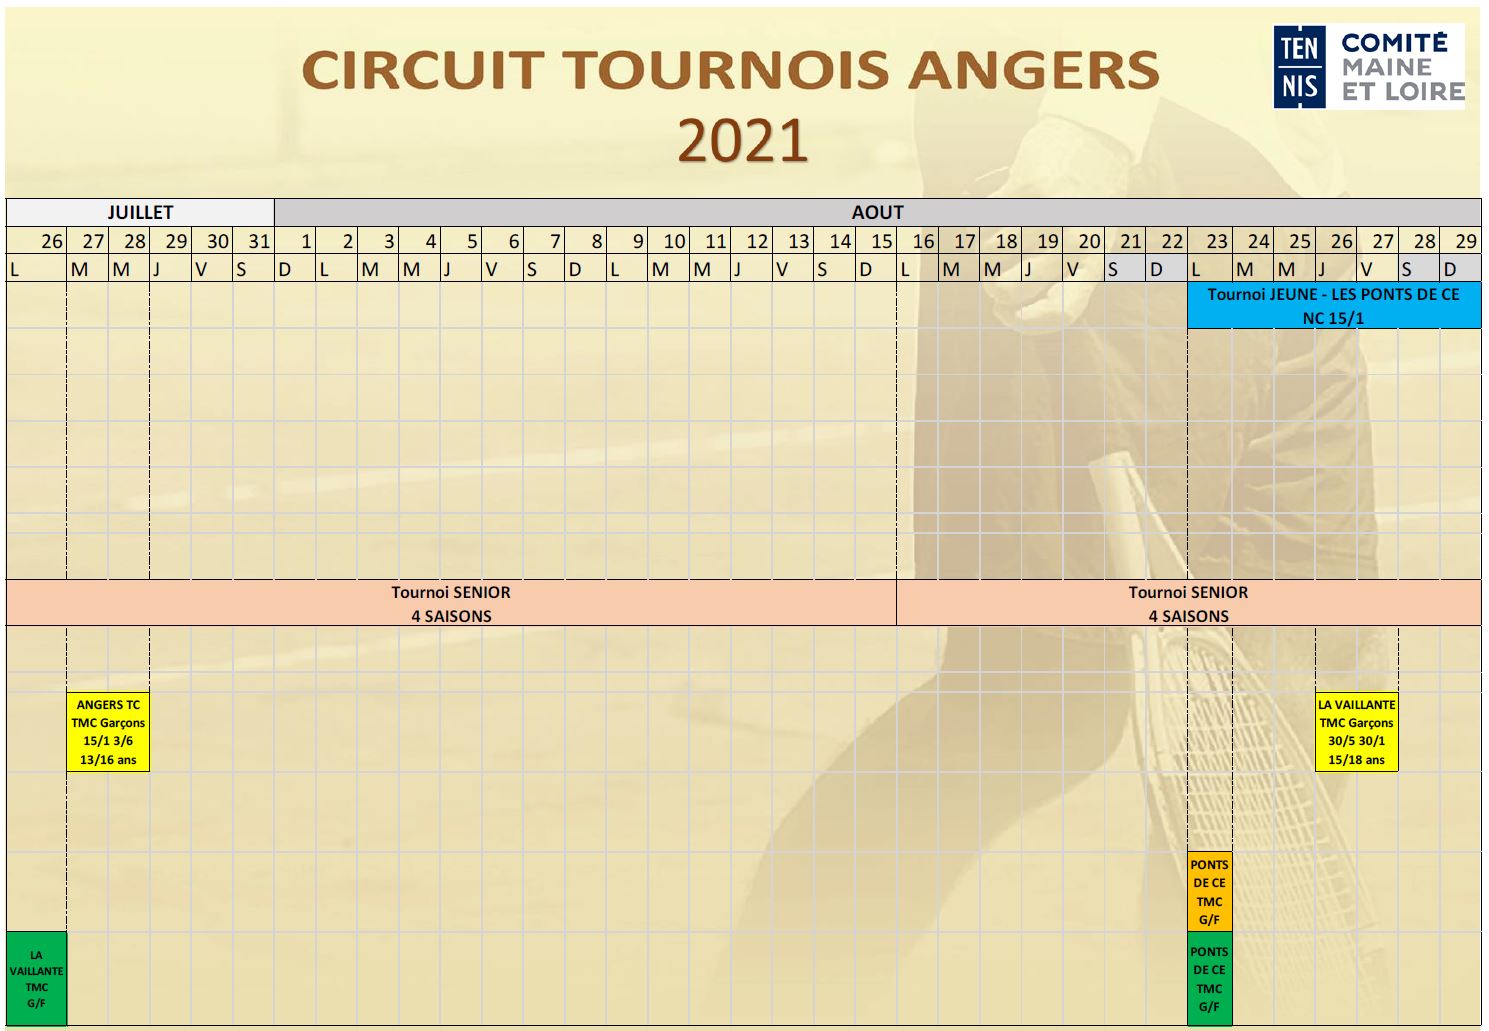 AFFICHE CIRCUIT TOURNOIS ANGERS 2021 page 1